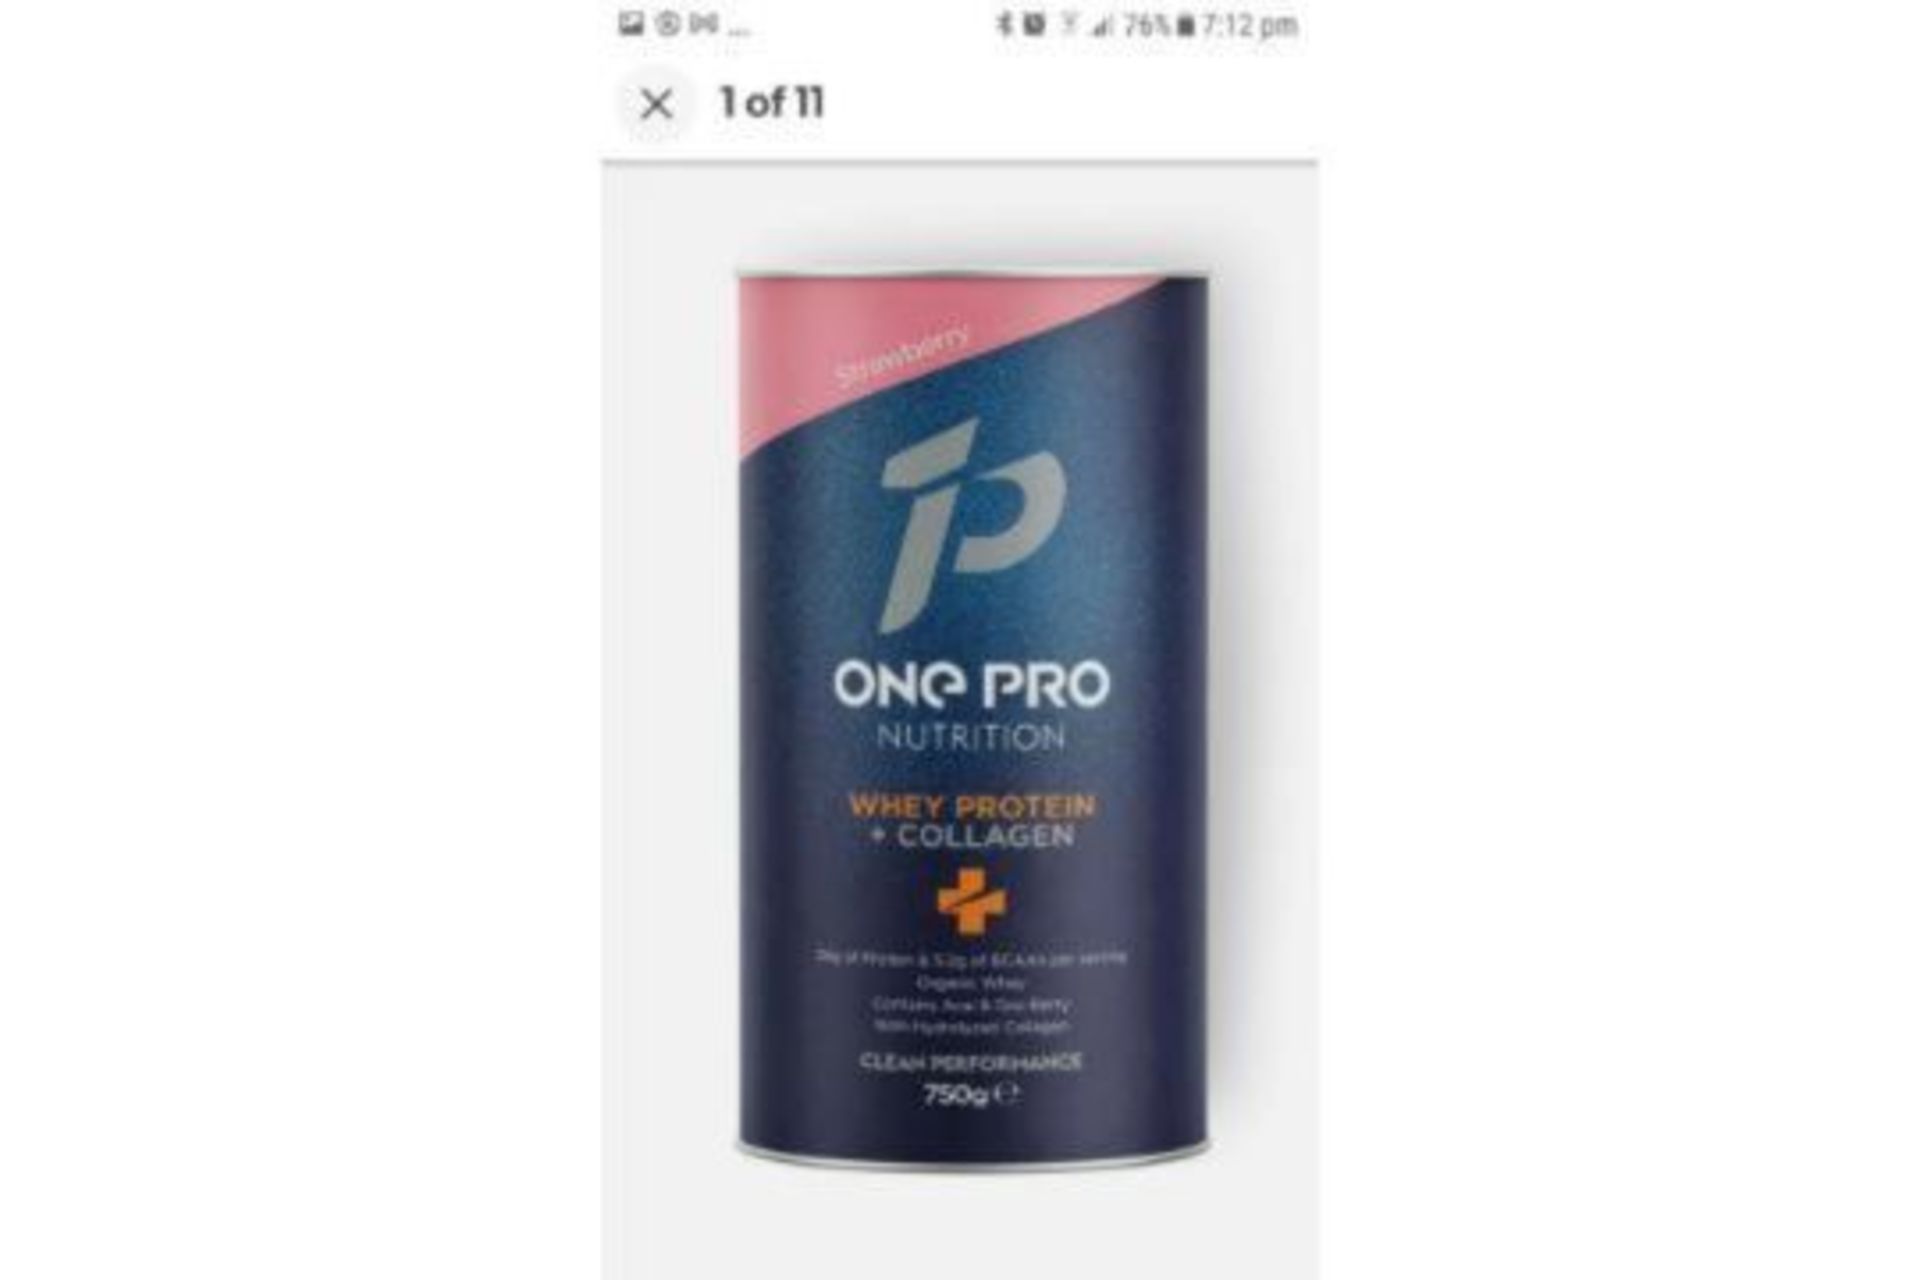 40 X BRAND NEW ONE NUTRITION 750G WHEY PROTEIN AND COLLAGEN BEST BEFORE MARCH 2022 (FLAVOURS MAY